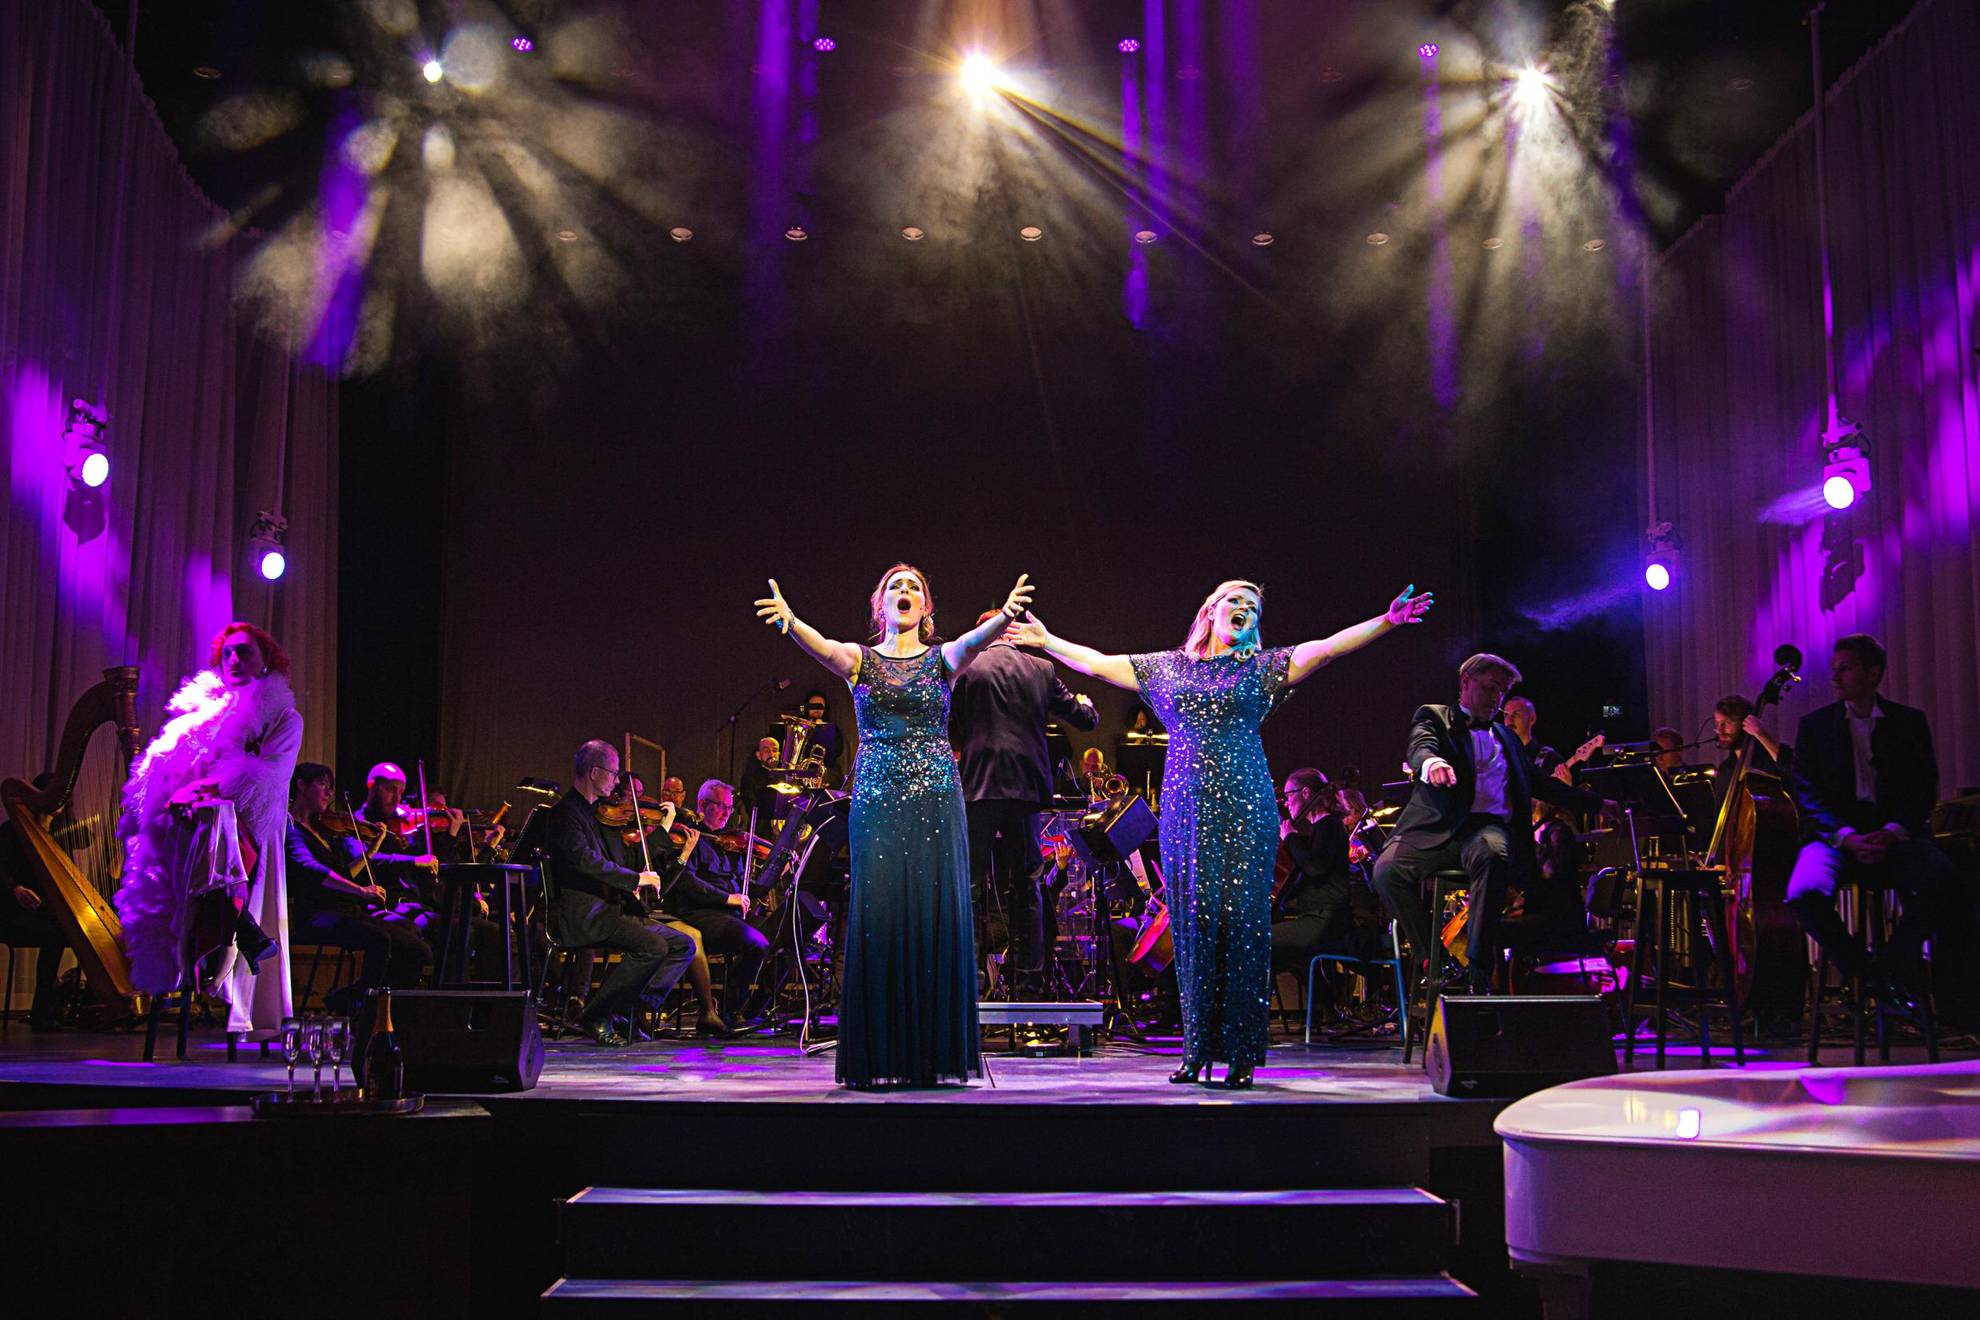 Two women in blue sparkly dresses sing on a stage during a performance. Behind them is an orchestra.